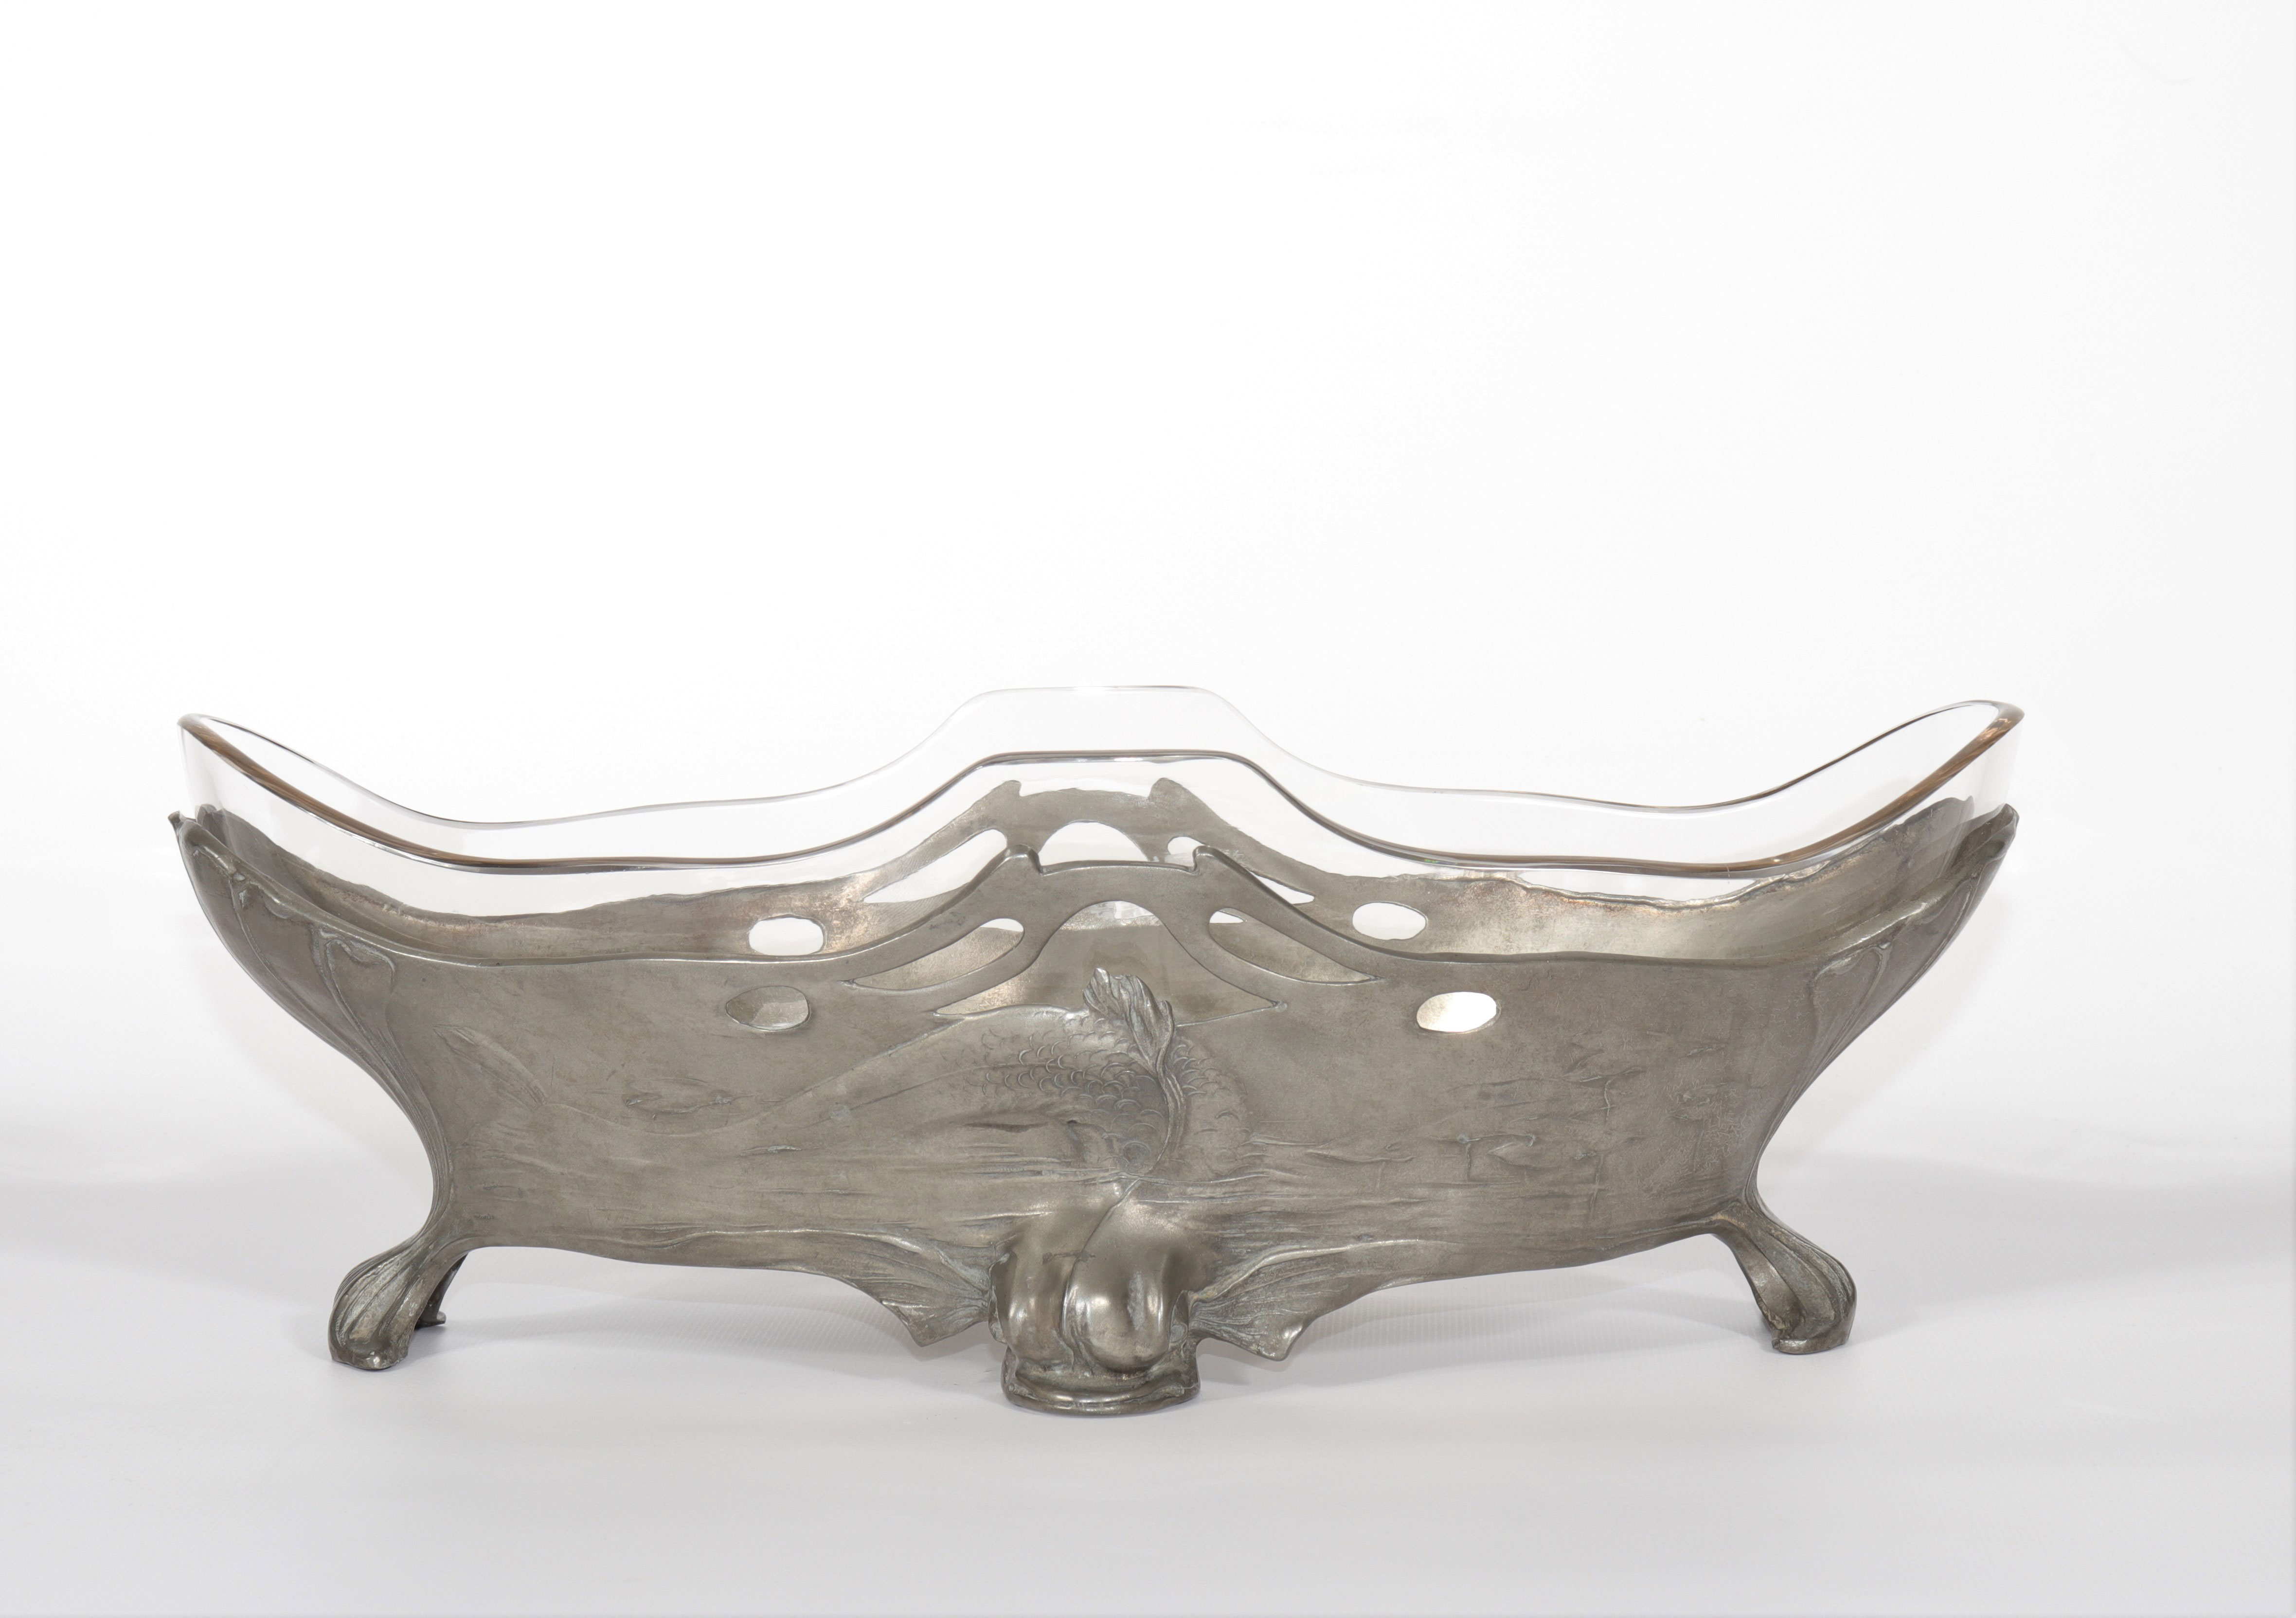 Art Nouveau planter in the shape of dolphins circa 1900 - Image 3 of 4